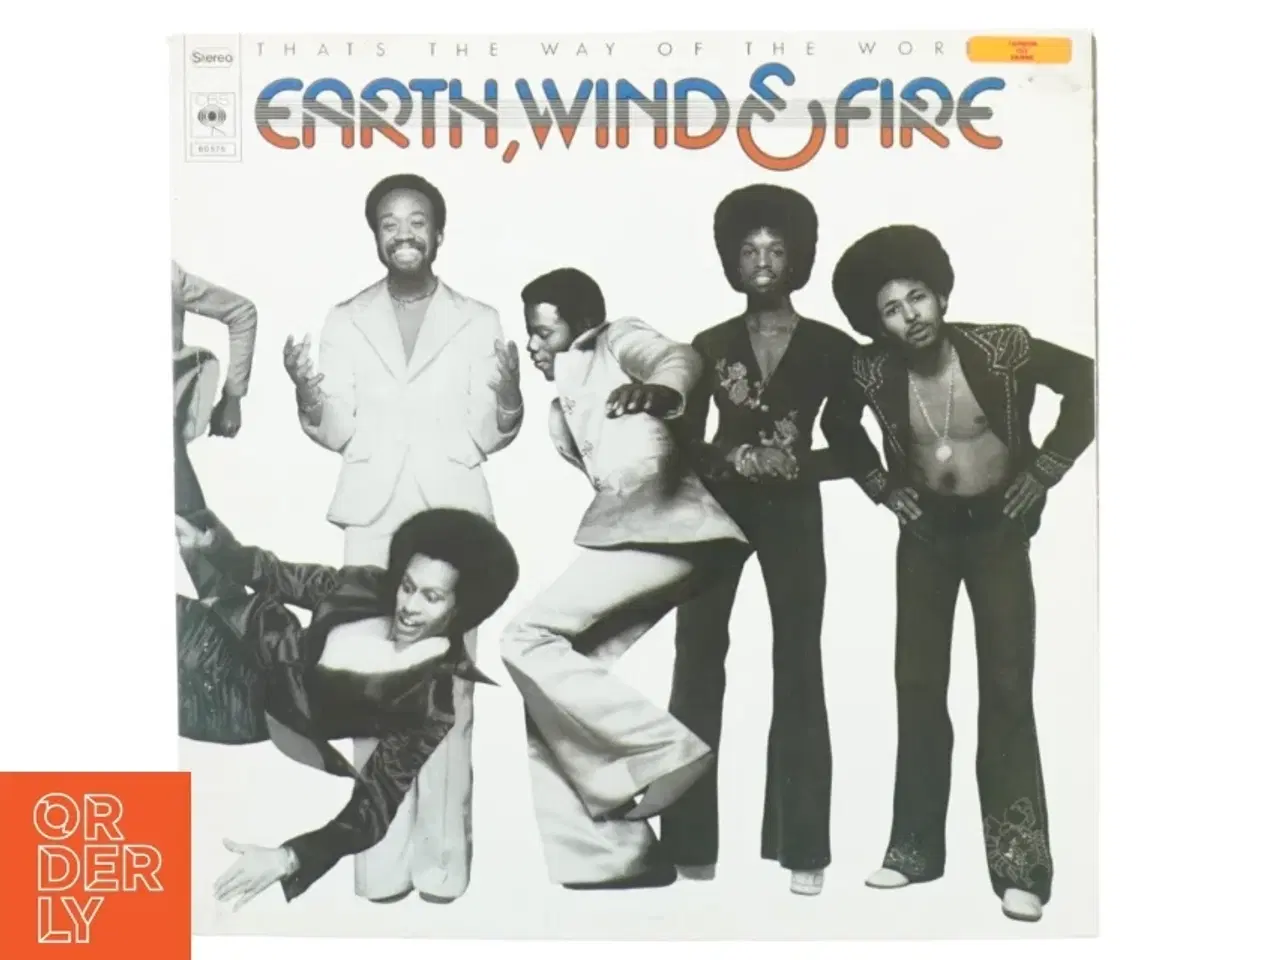 Billede 1 - Thats the way of the world earth wind and fire (LP) fra Cbs (str. 30 cm)